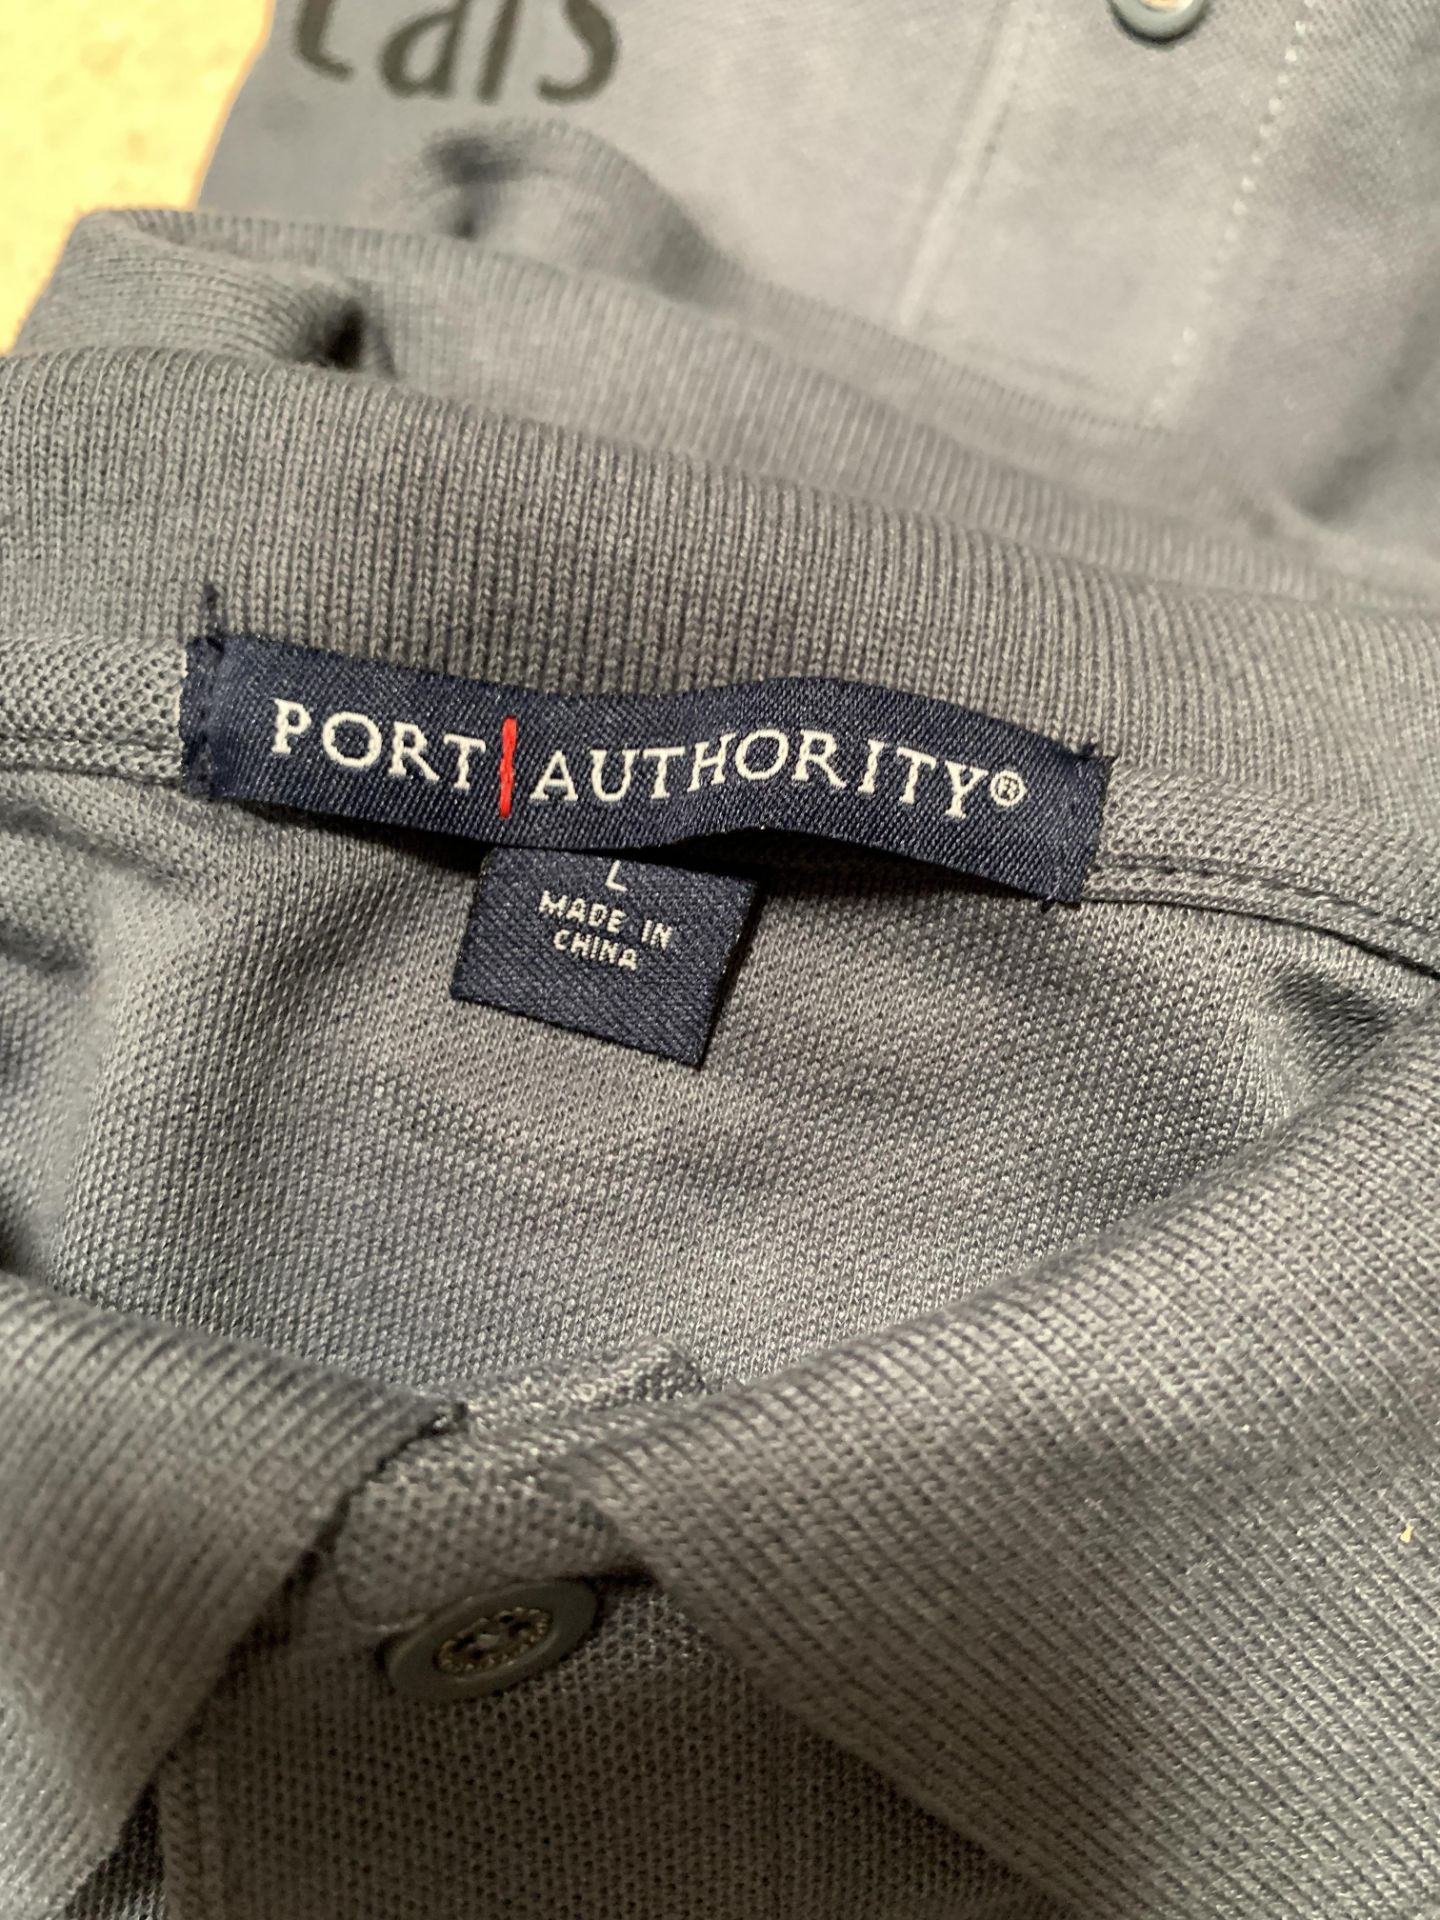 24 Gray Men's Polos, Port Authority Brand, Large - Image 5 of 7